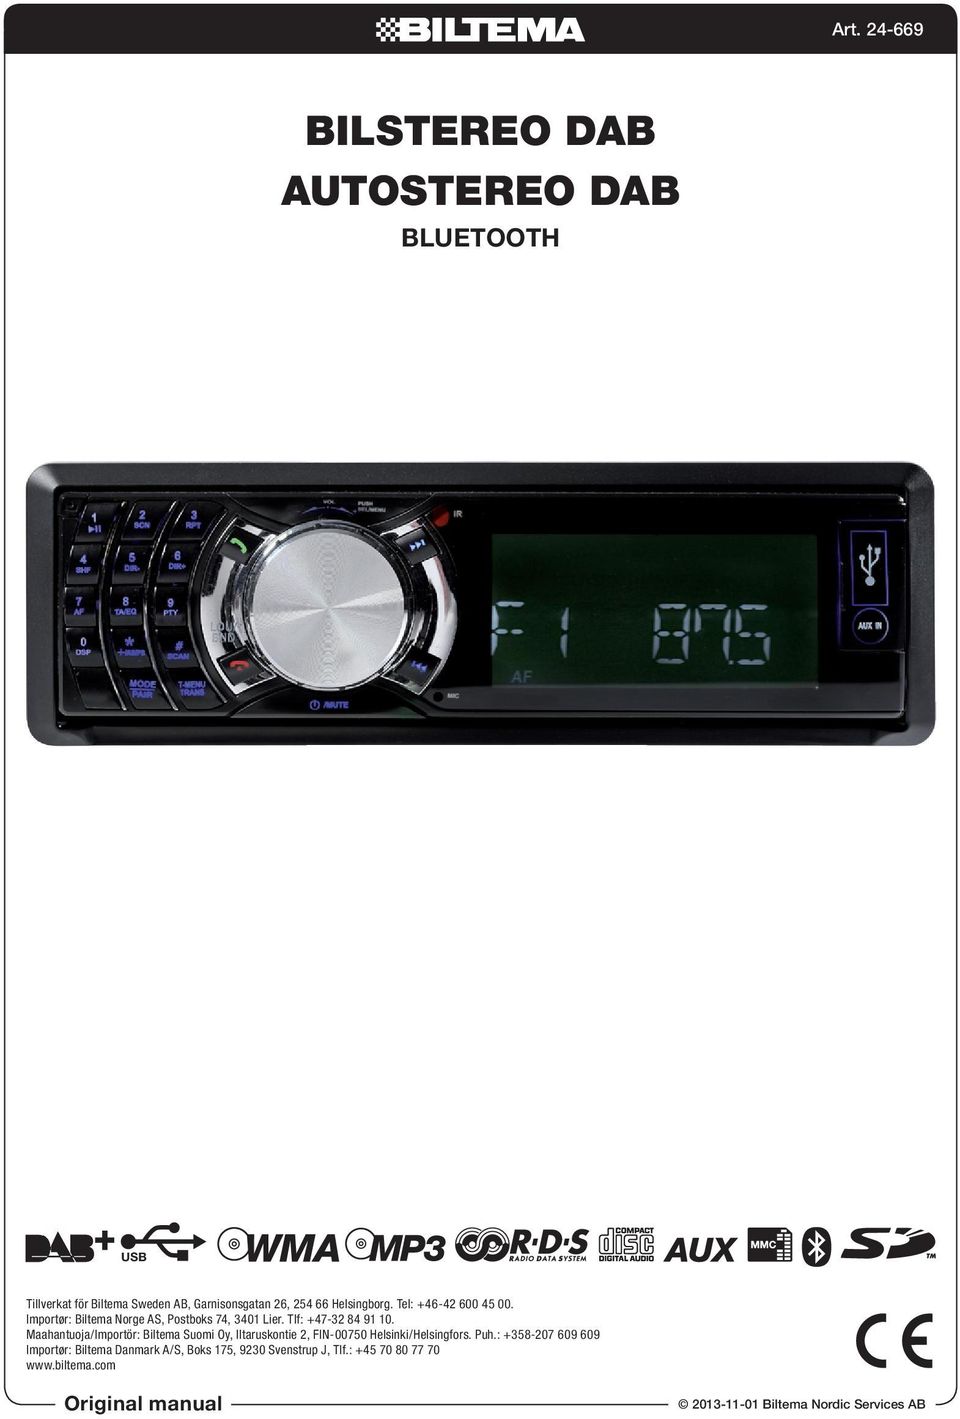 BILSTEREO DAB AUTOSTEREO DAB - PDF Free Download